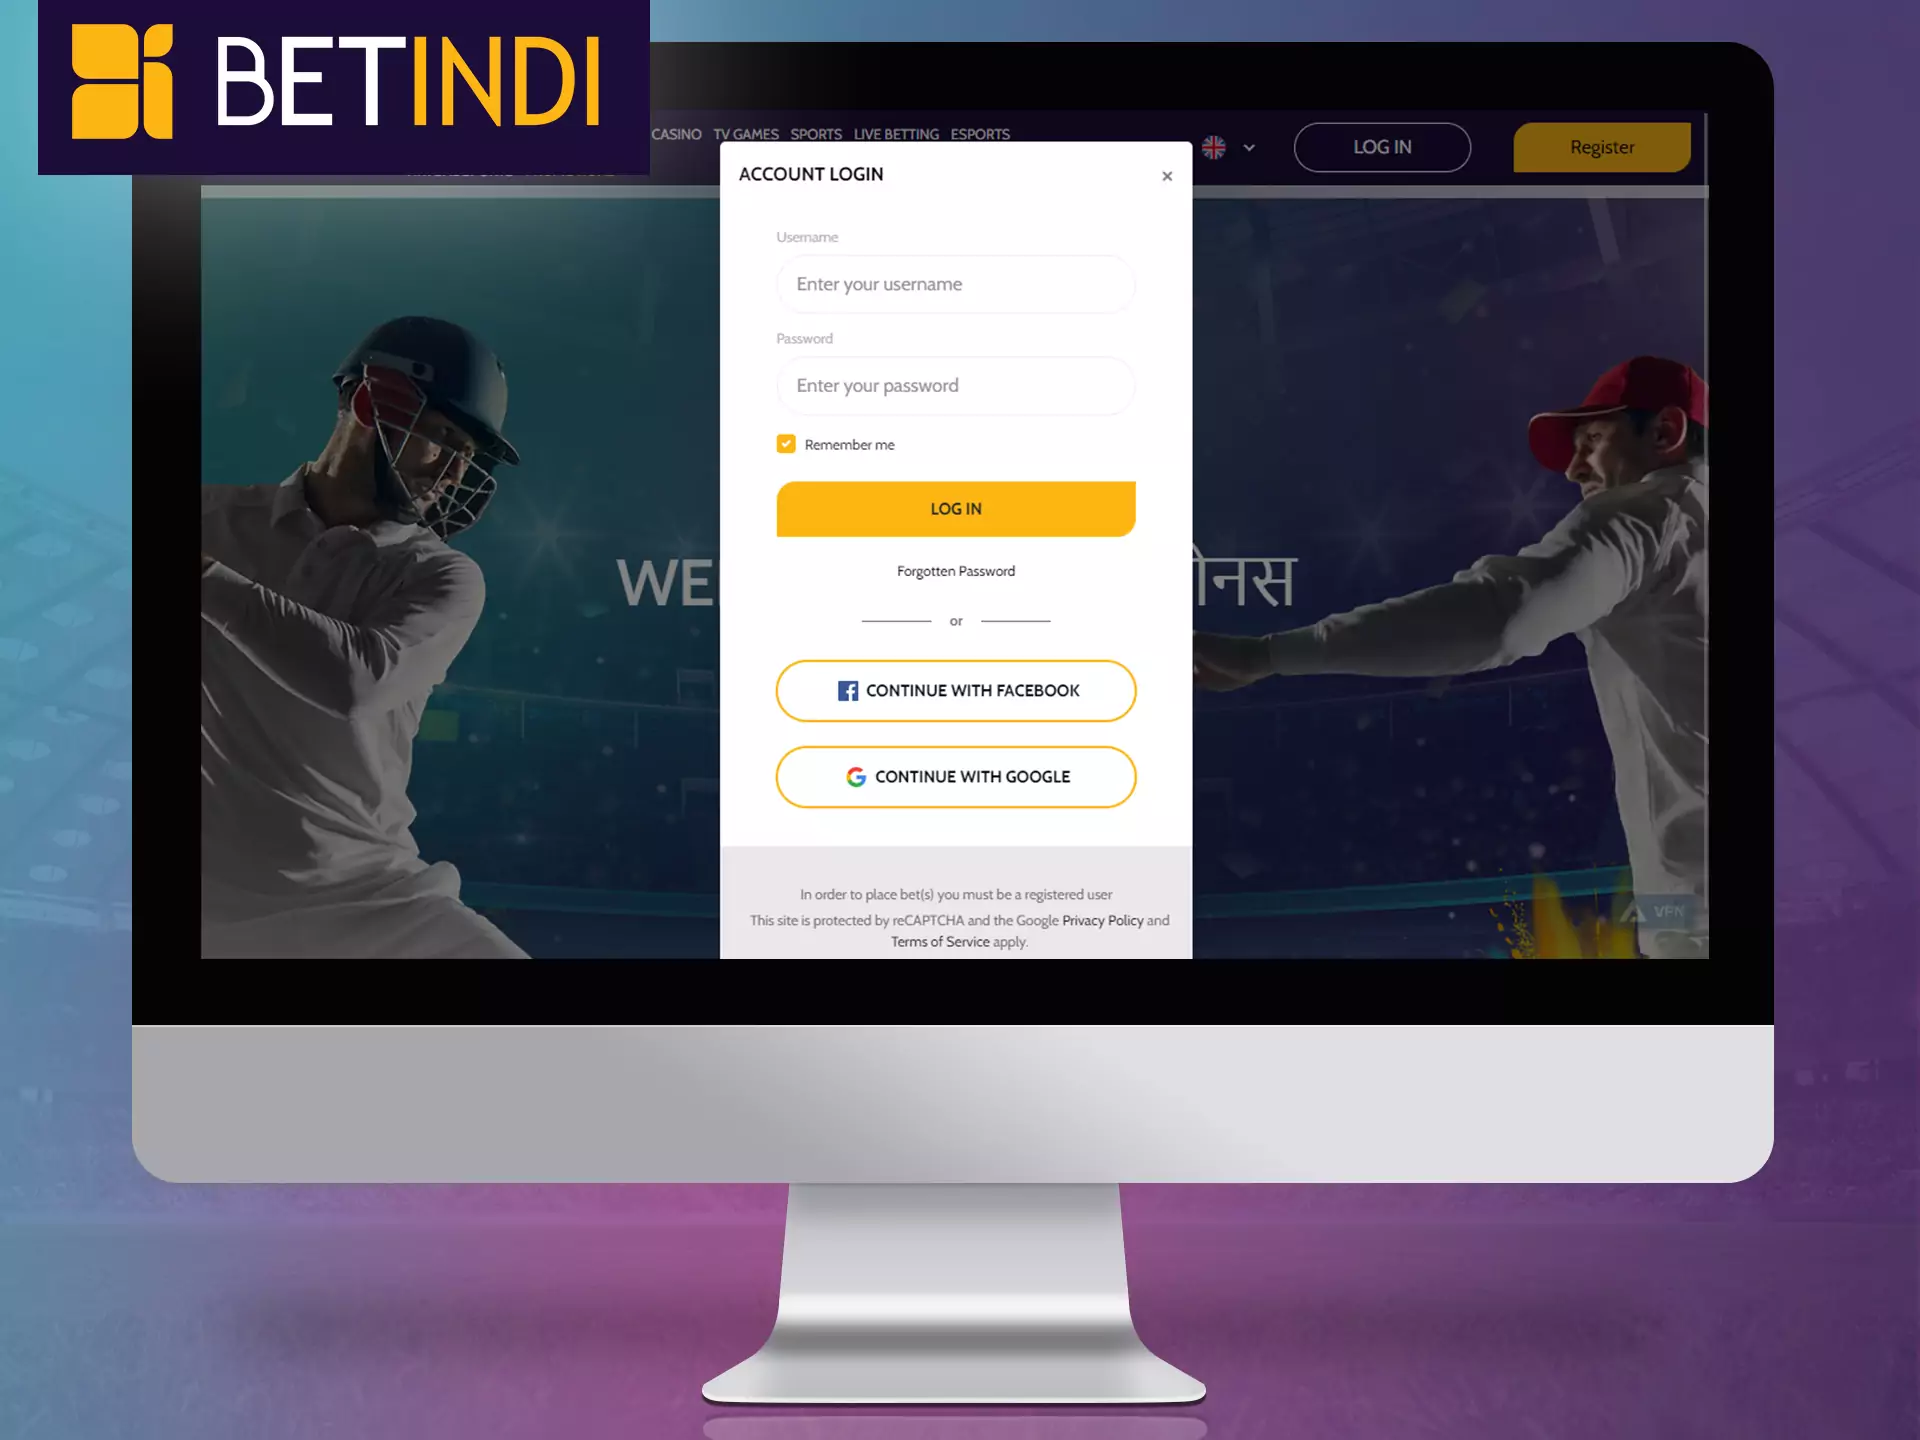 Log into your Betindi account to place bets and play your favorite games.